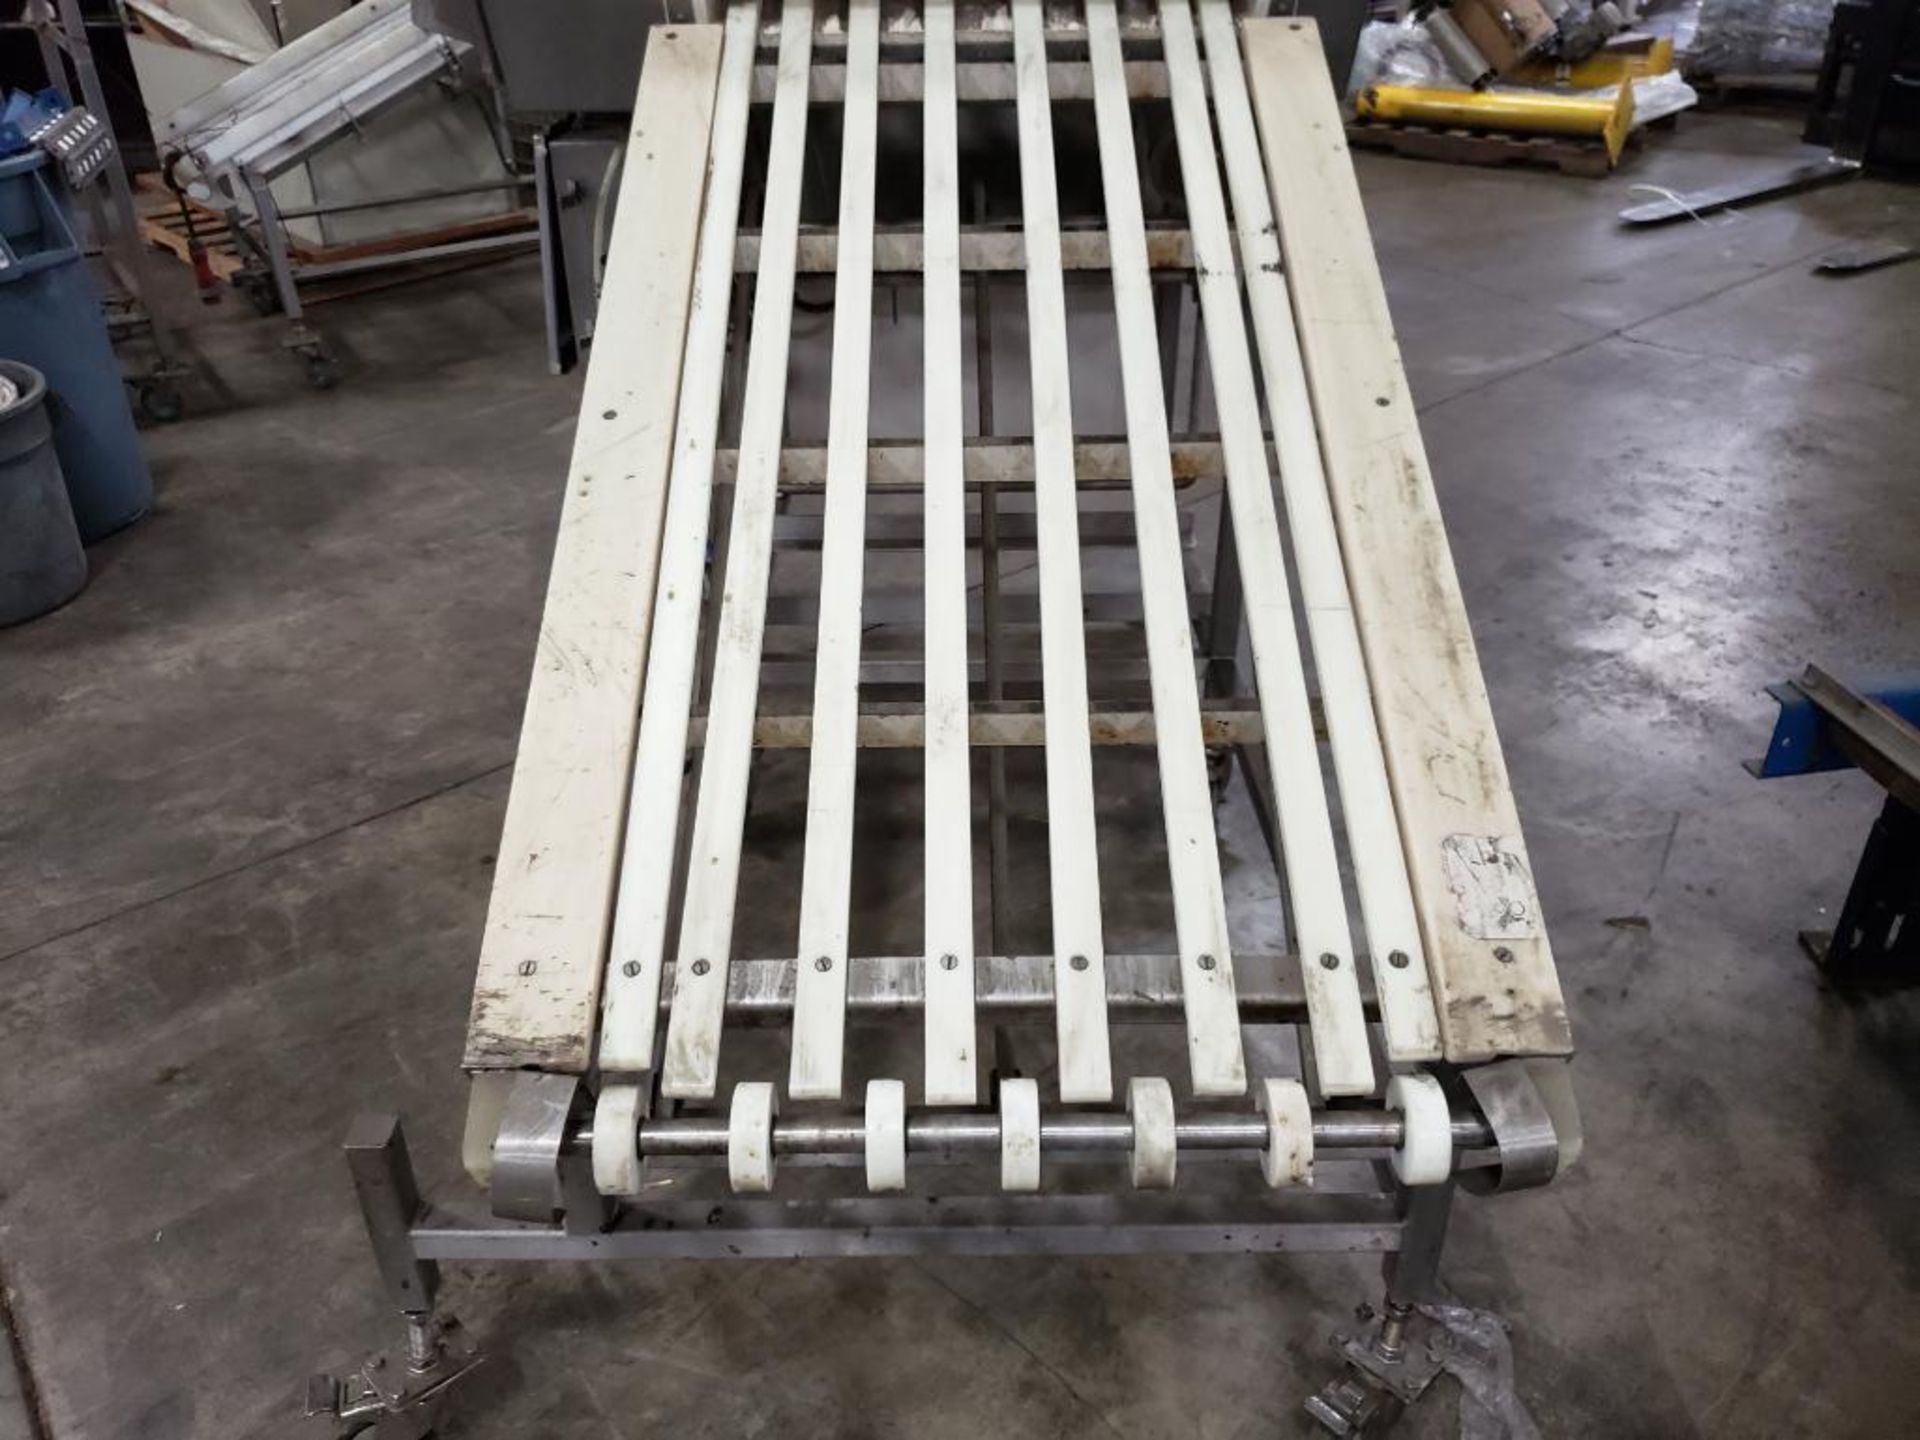 Safeline pass through metal detector with incline power conveyor. - Image 16 of 19